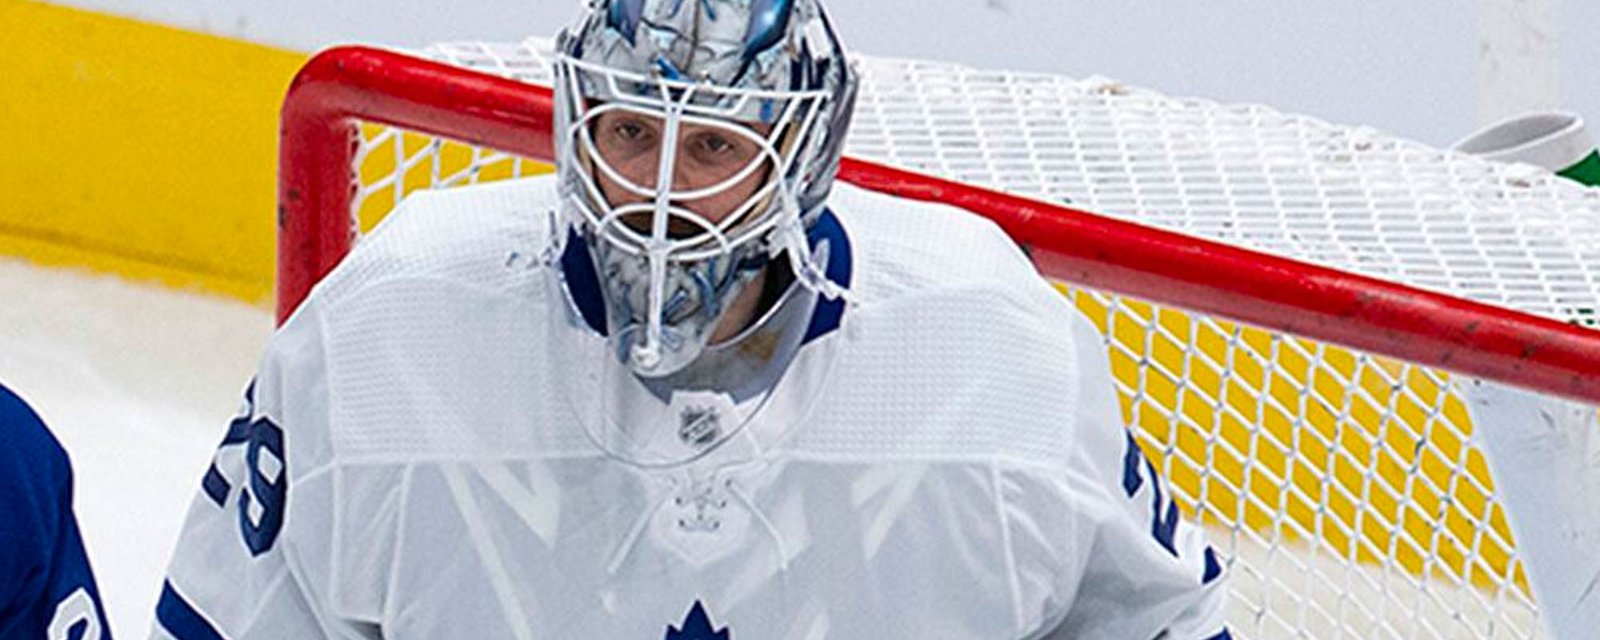 Former Leafs goalie signs PTO contract